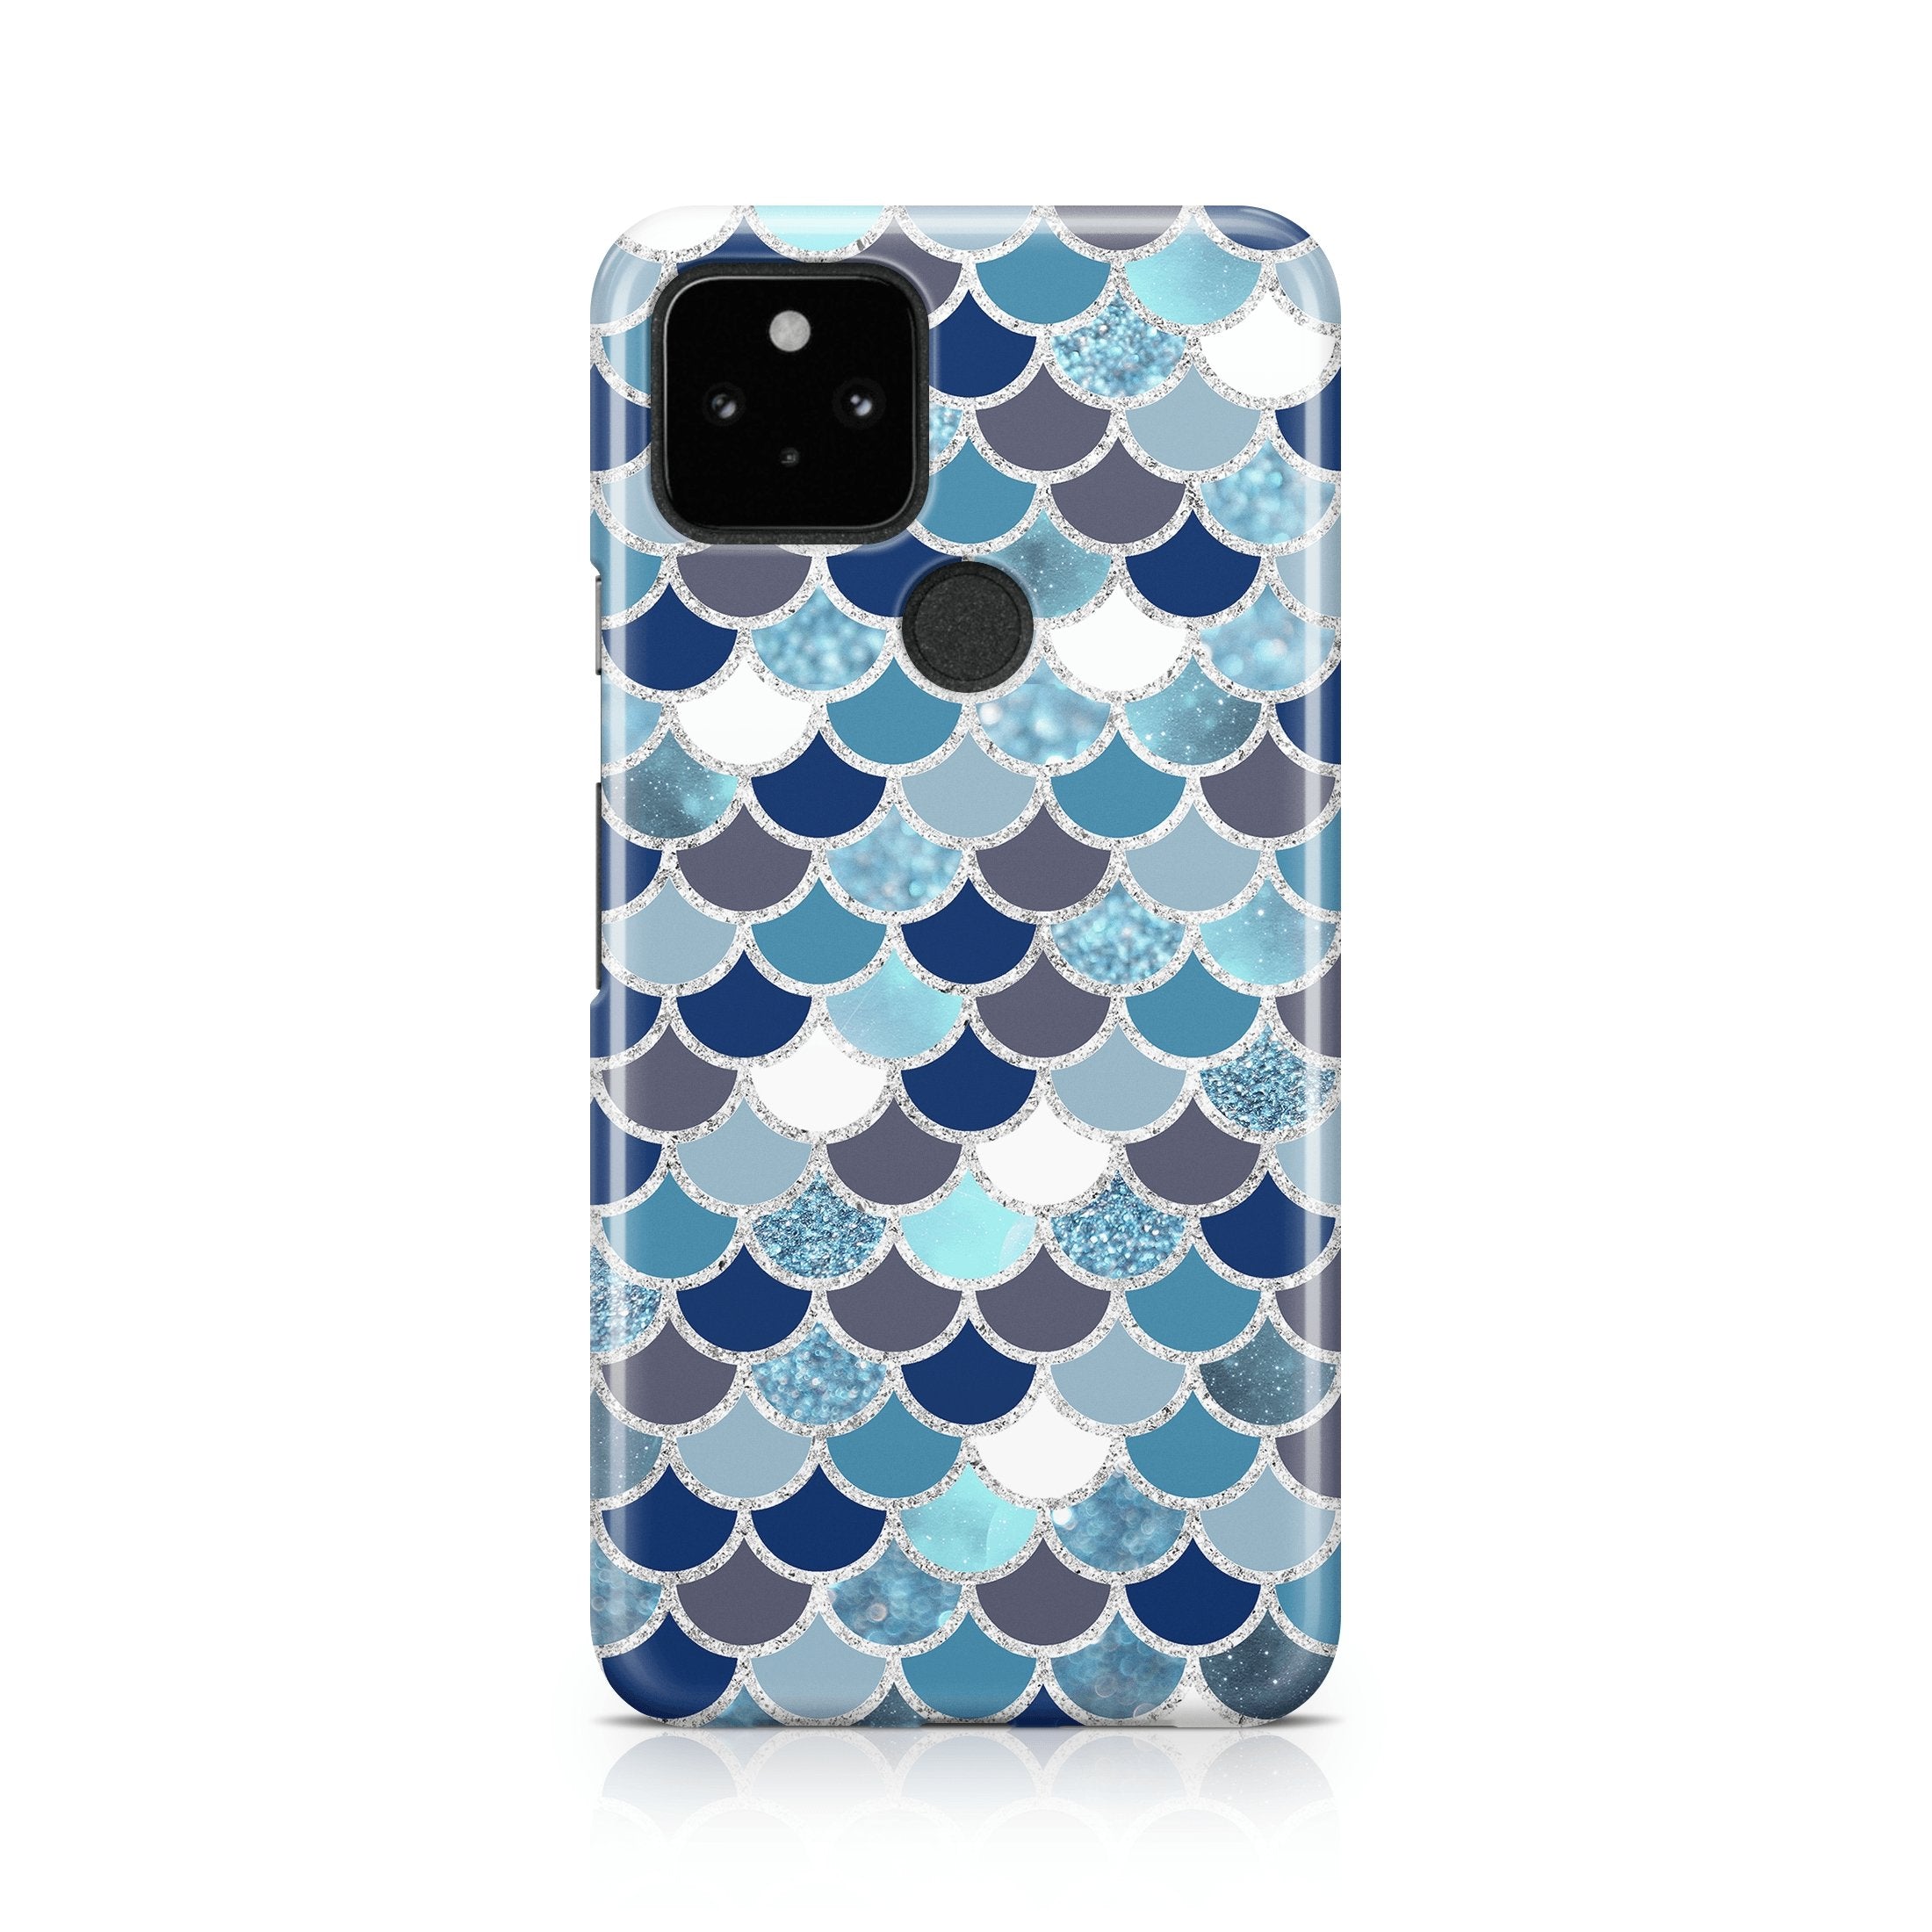 Blue & White Mermaid Scale - Google phone case designs by CaseSwagger